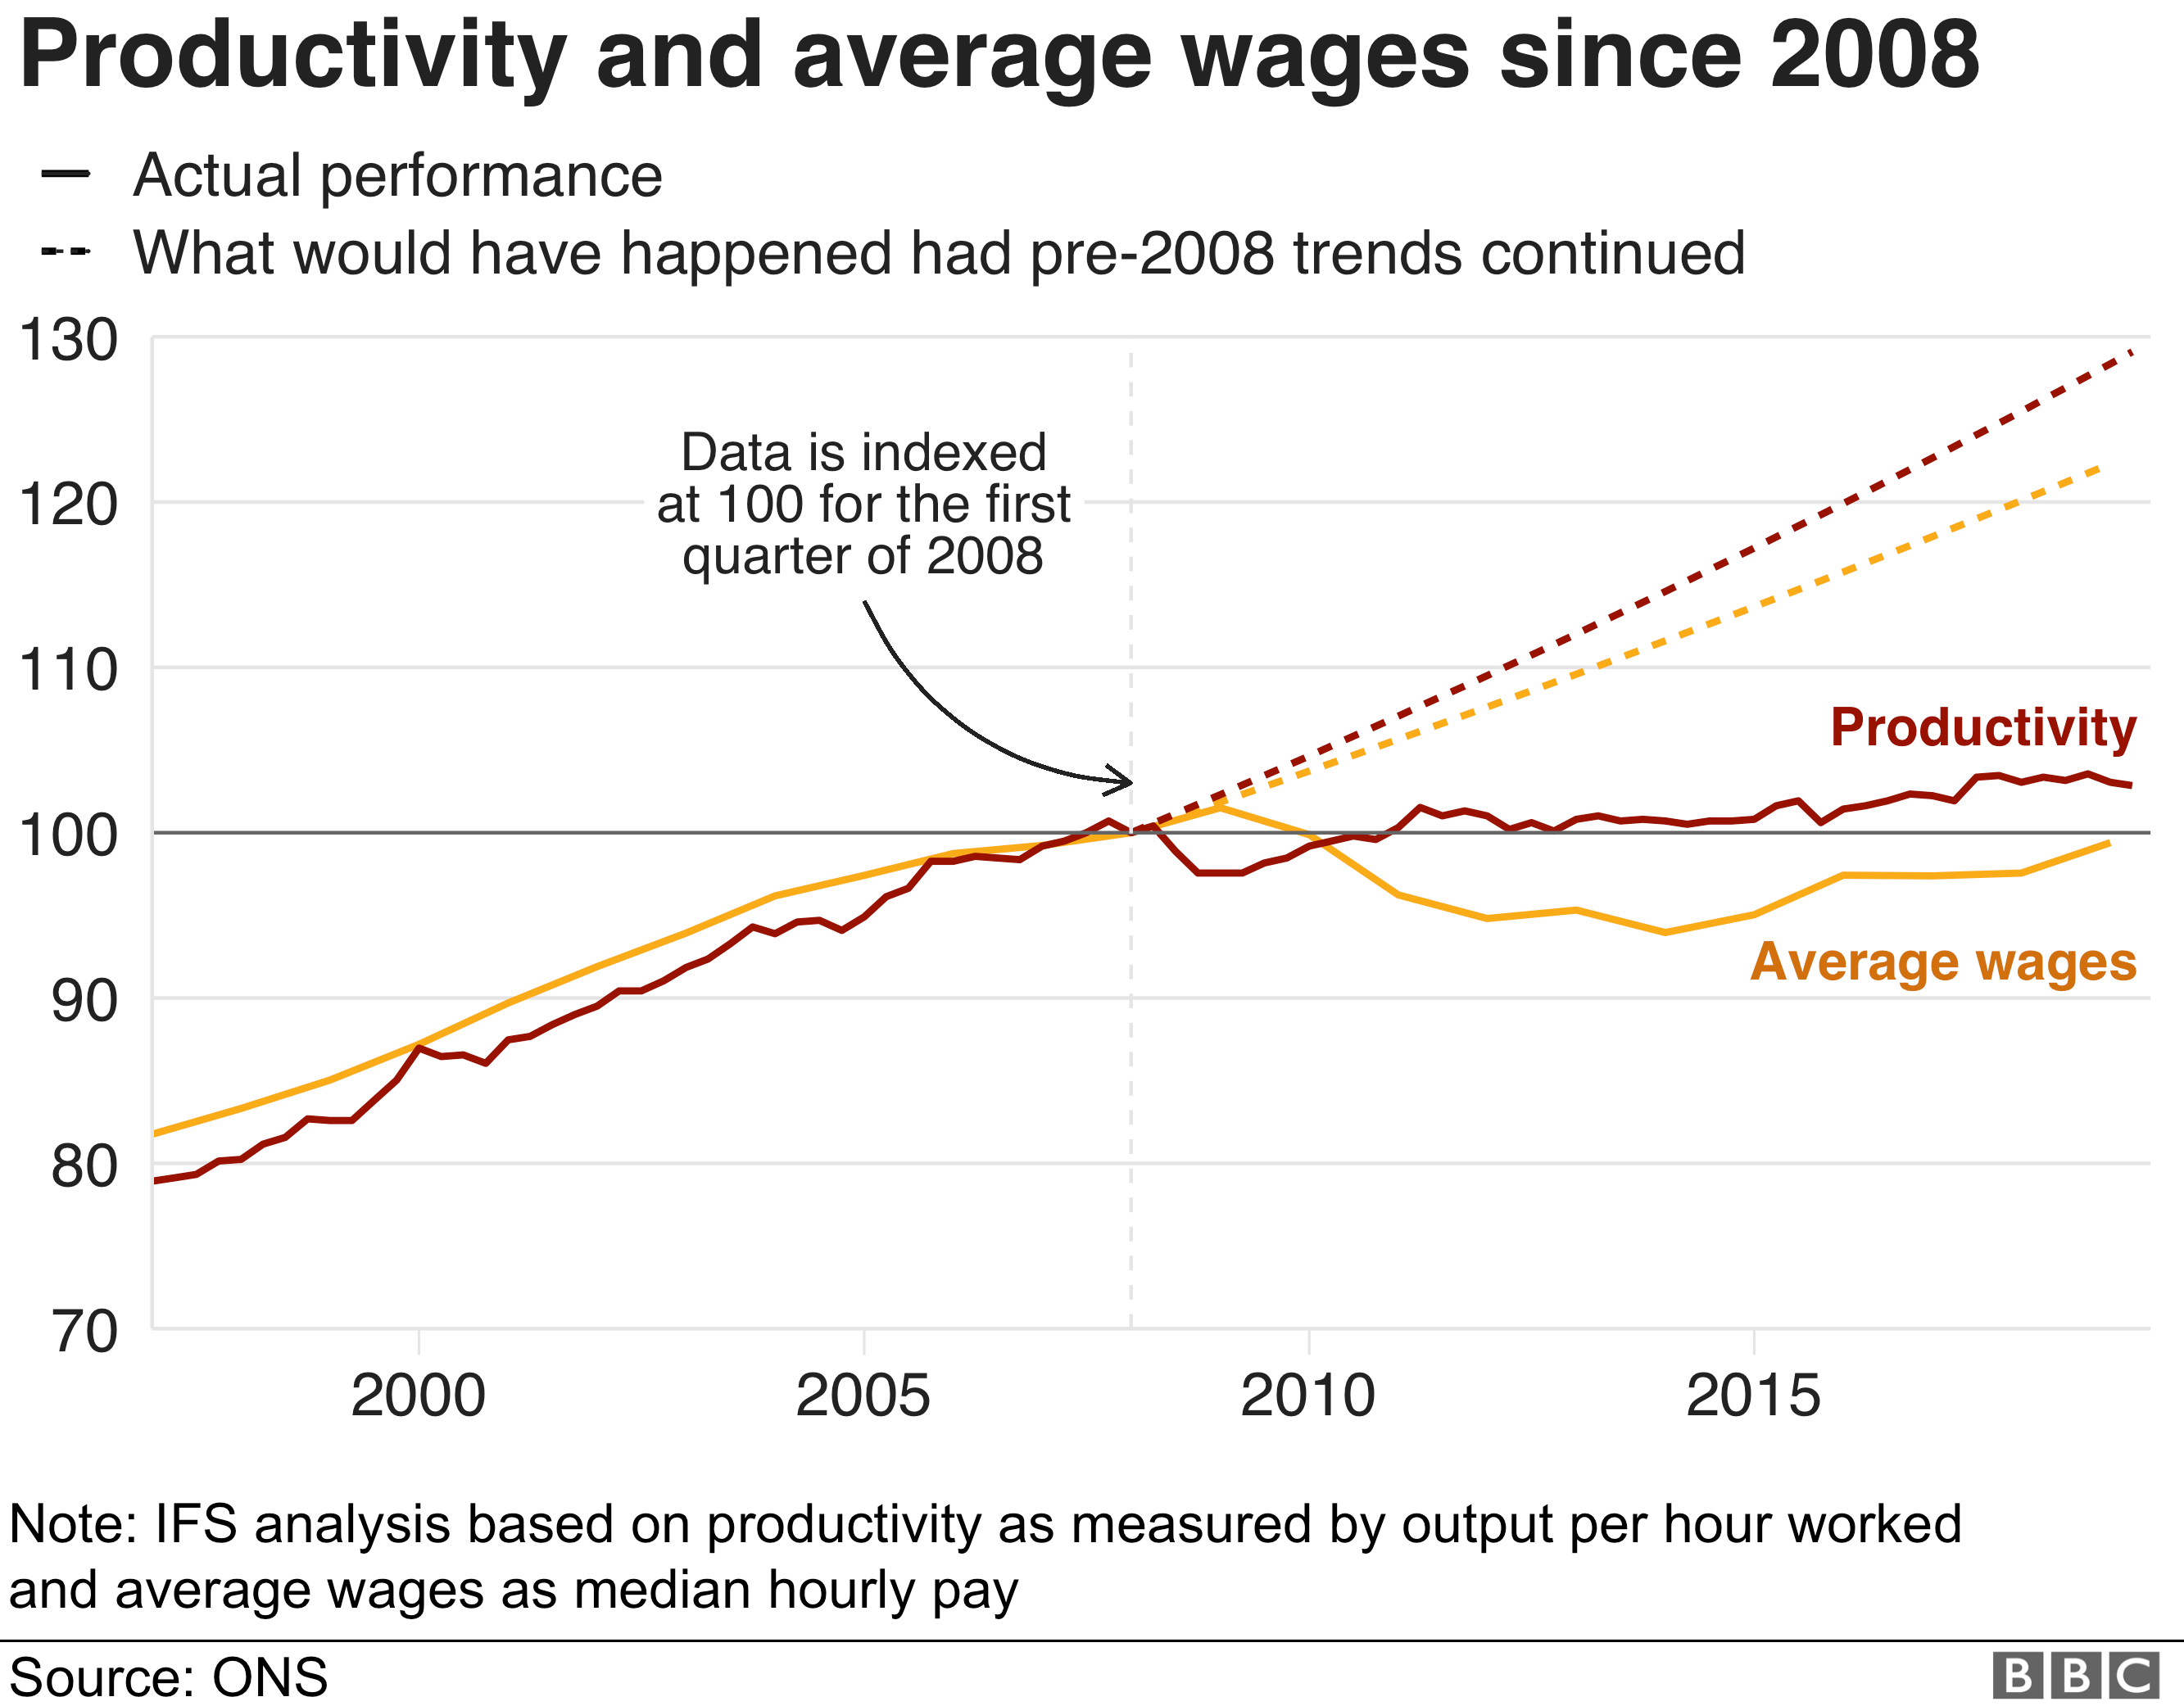 Chart title: "Productivity and average wages have performed terribly since 2008" - shows the actual performance of productivity and average wages, and how they would have continued to rise if they had followed pre-2008 trends